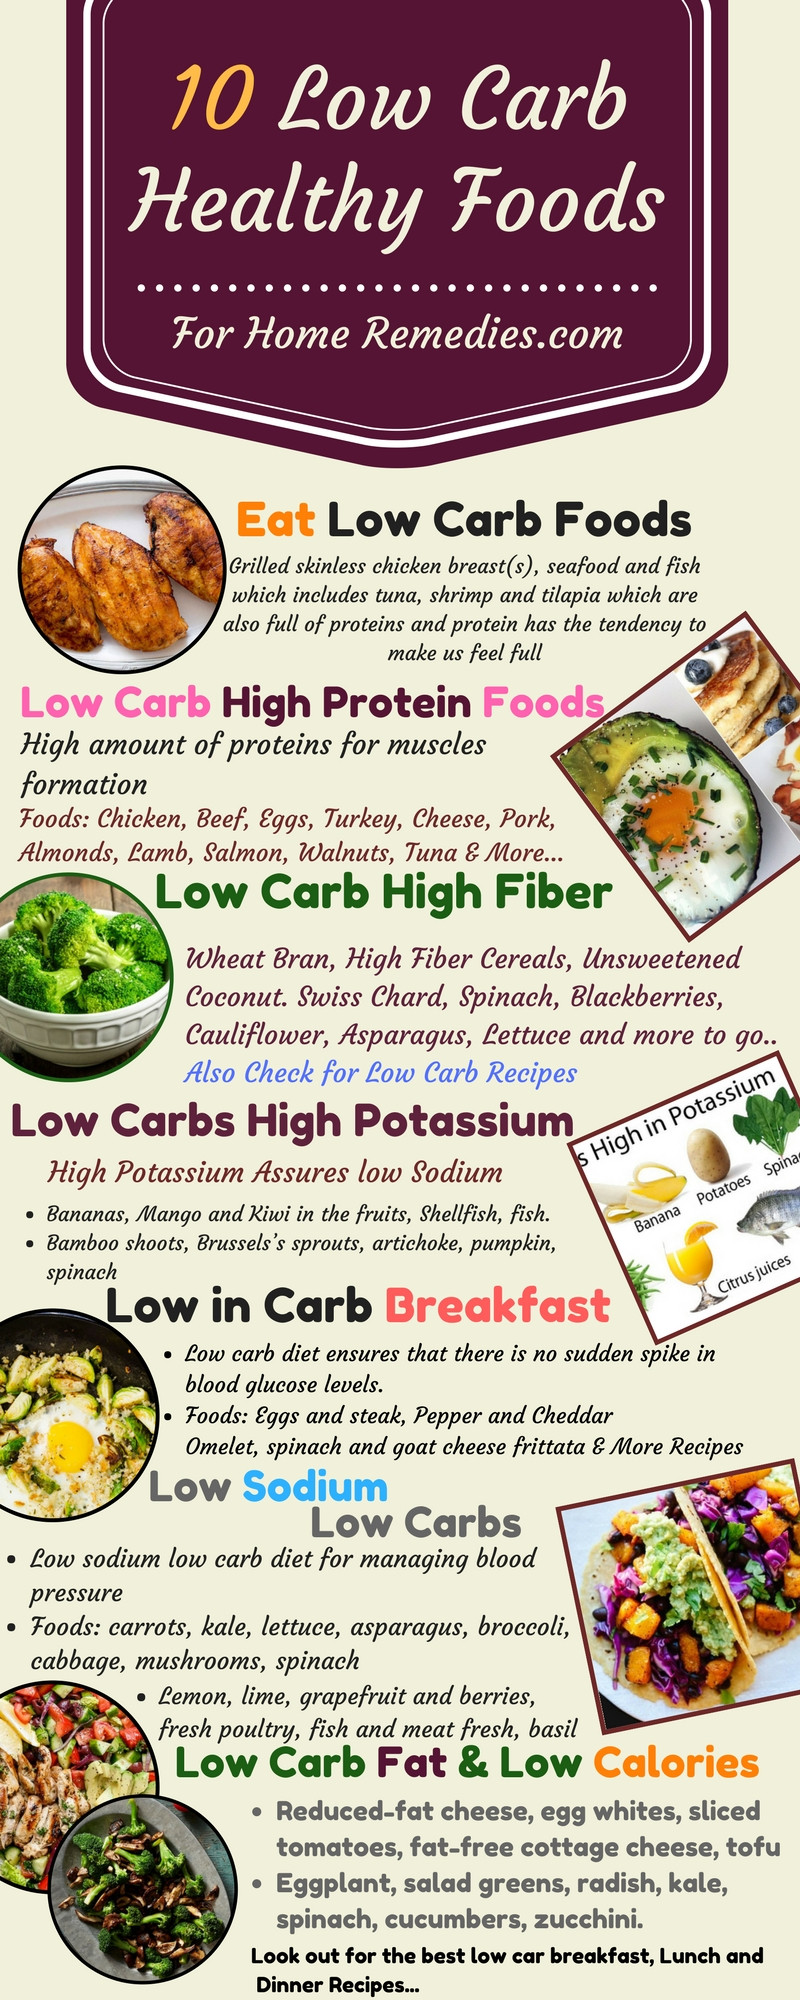 Low Carb Low Cholesterol Recipes
 10 Low Carb Foods Low Fat Sugar High Protein Fiber